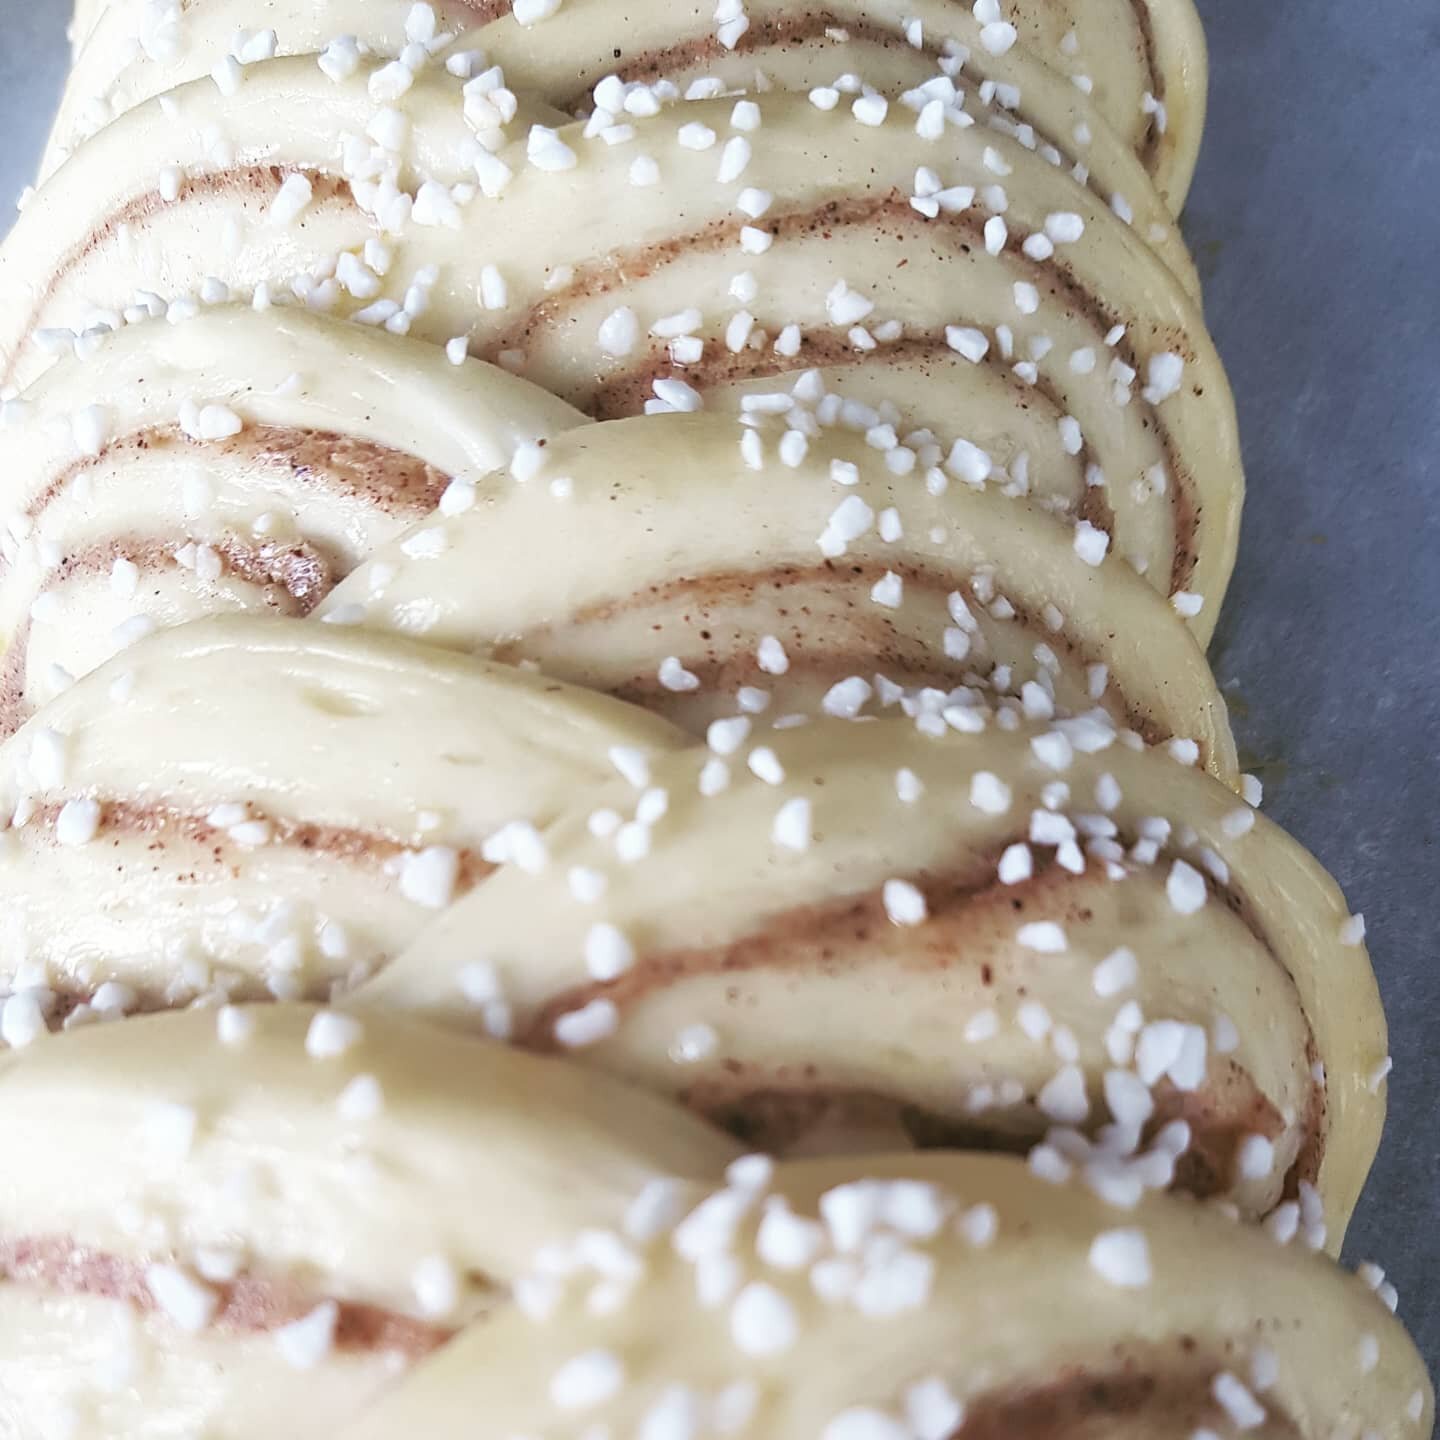 Pre-oven shot of NZ's best cinnamon bun, just in a slightly different shape.

Wheat bread plaits are very common in Scandinavia and the perfect way of sorting out your morning tea shout -just make sure you slice it yourself so you're certain to get a